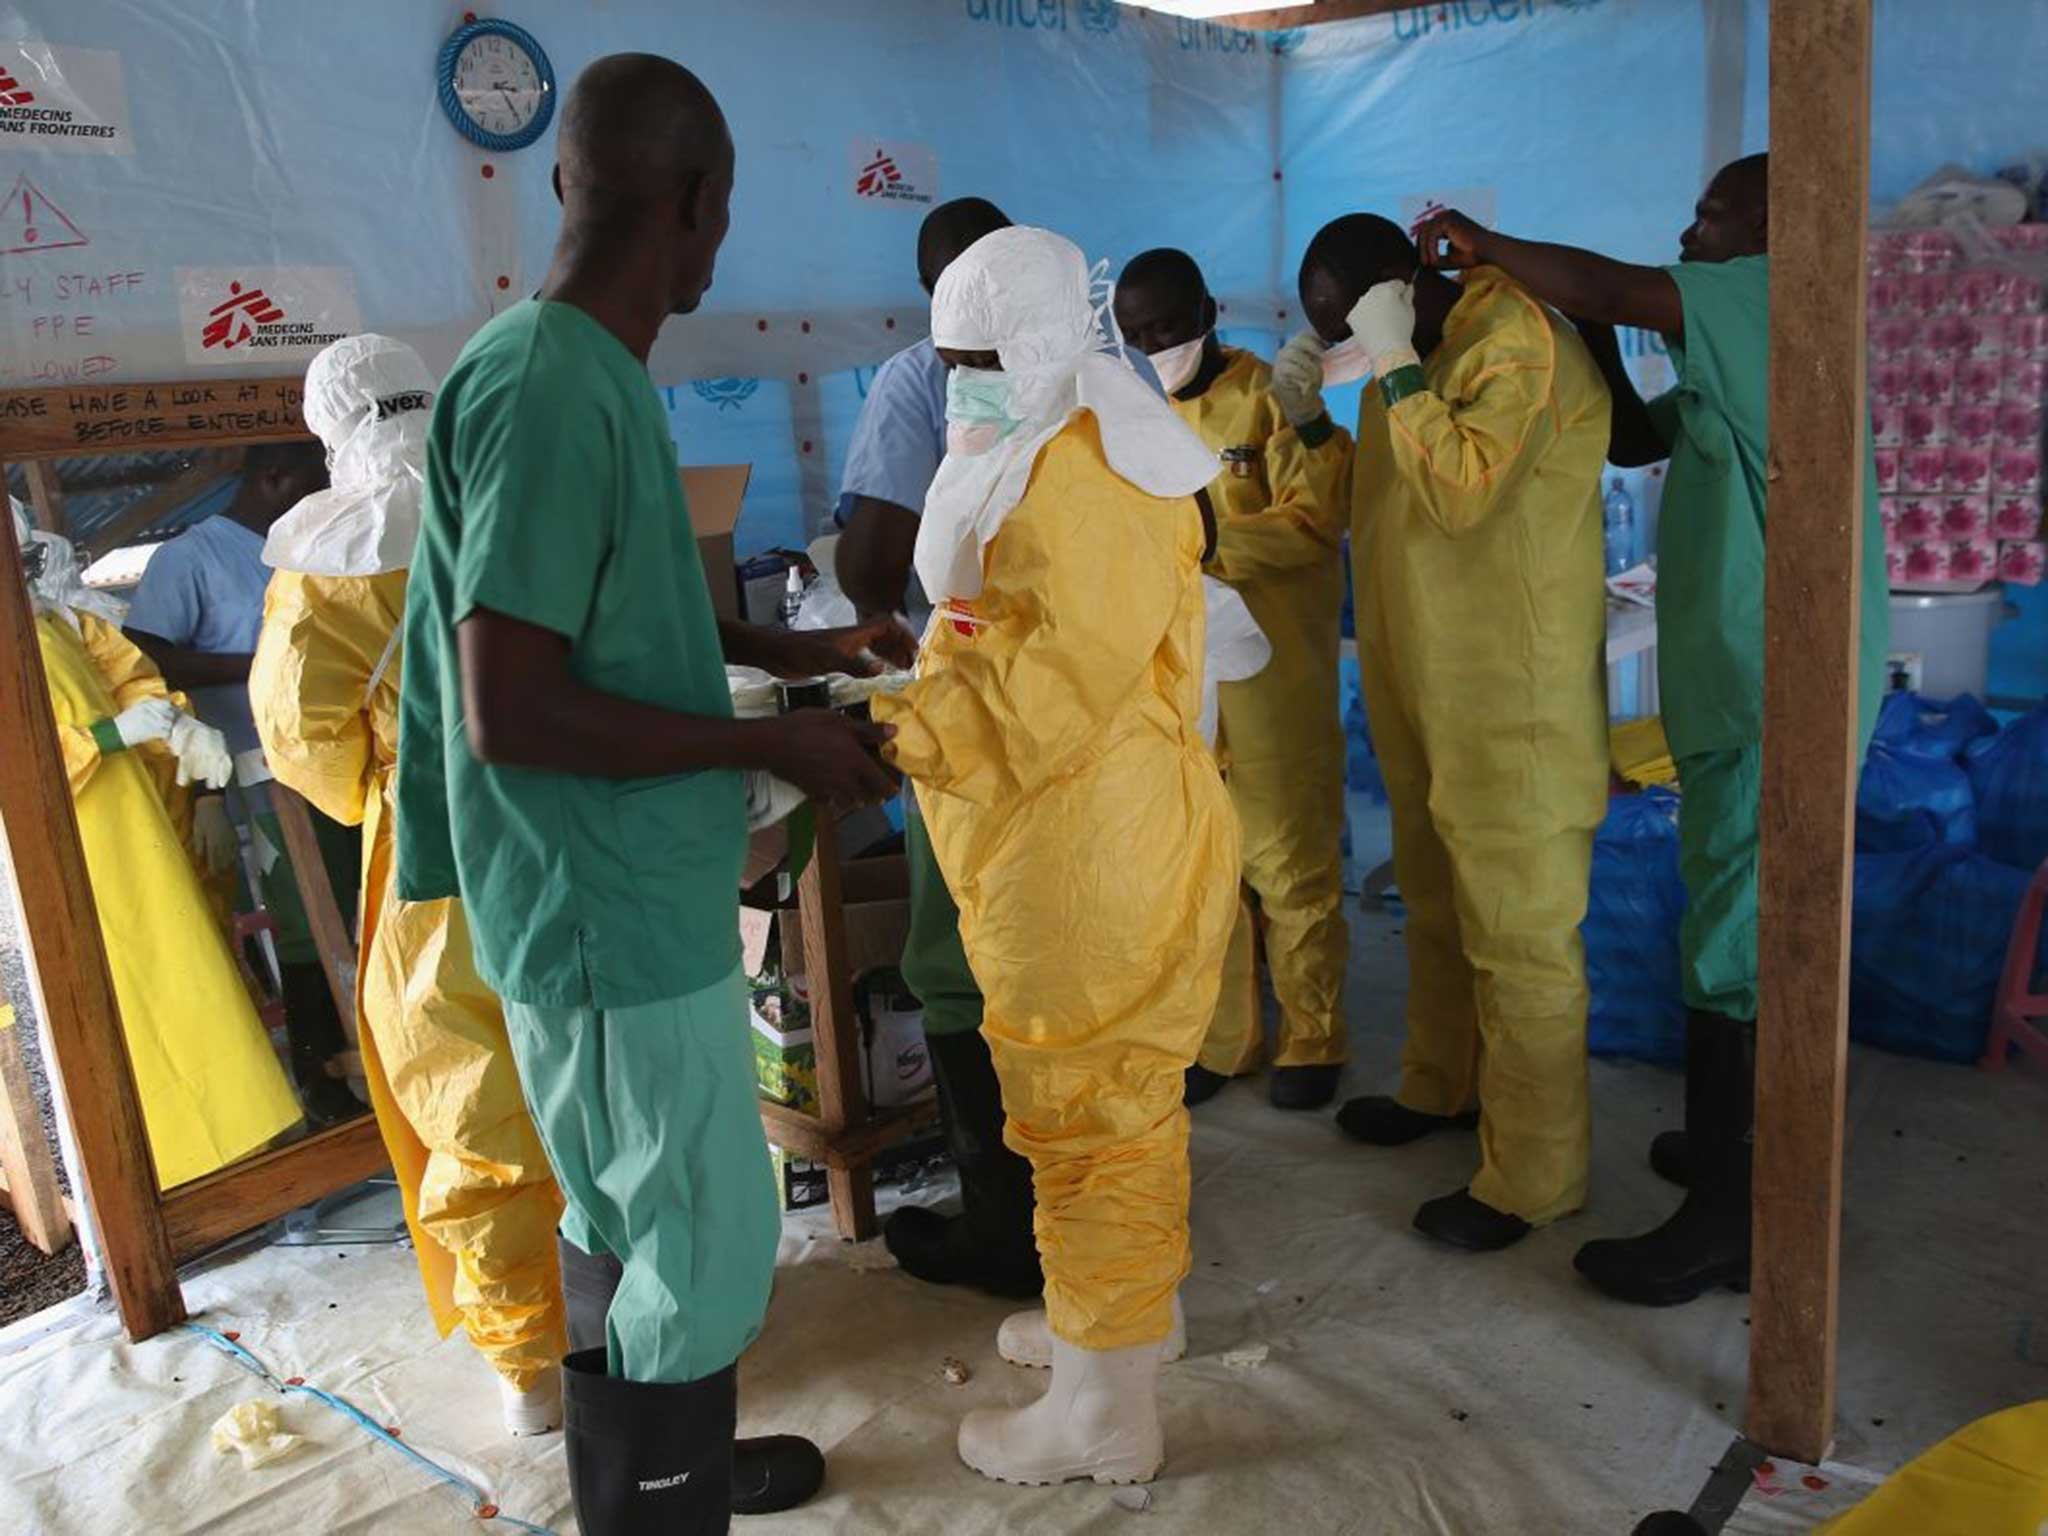 Doctors are struggling to deal with the Ebola outbreak in Liberia